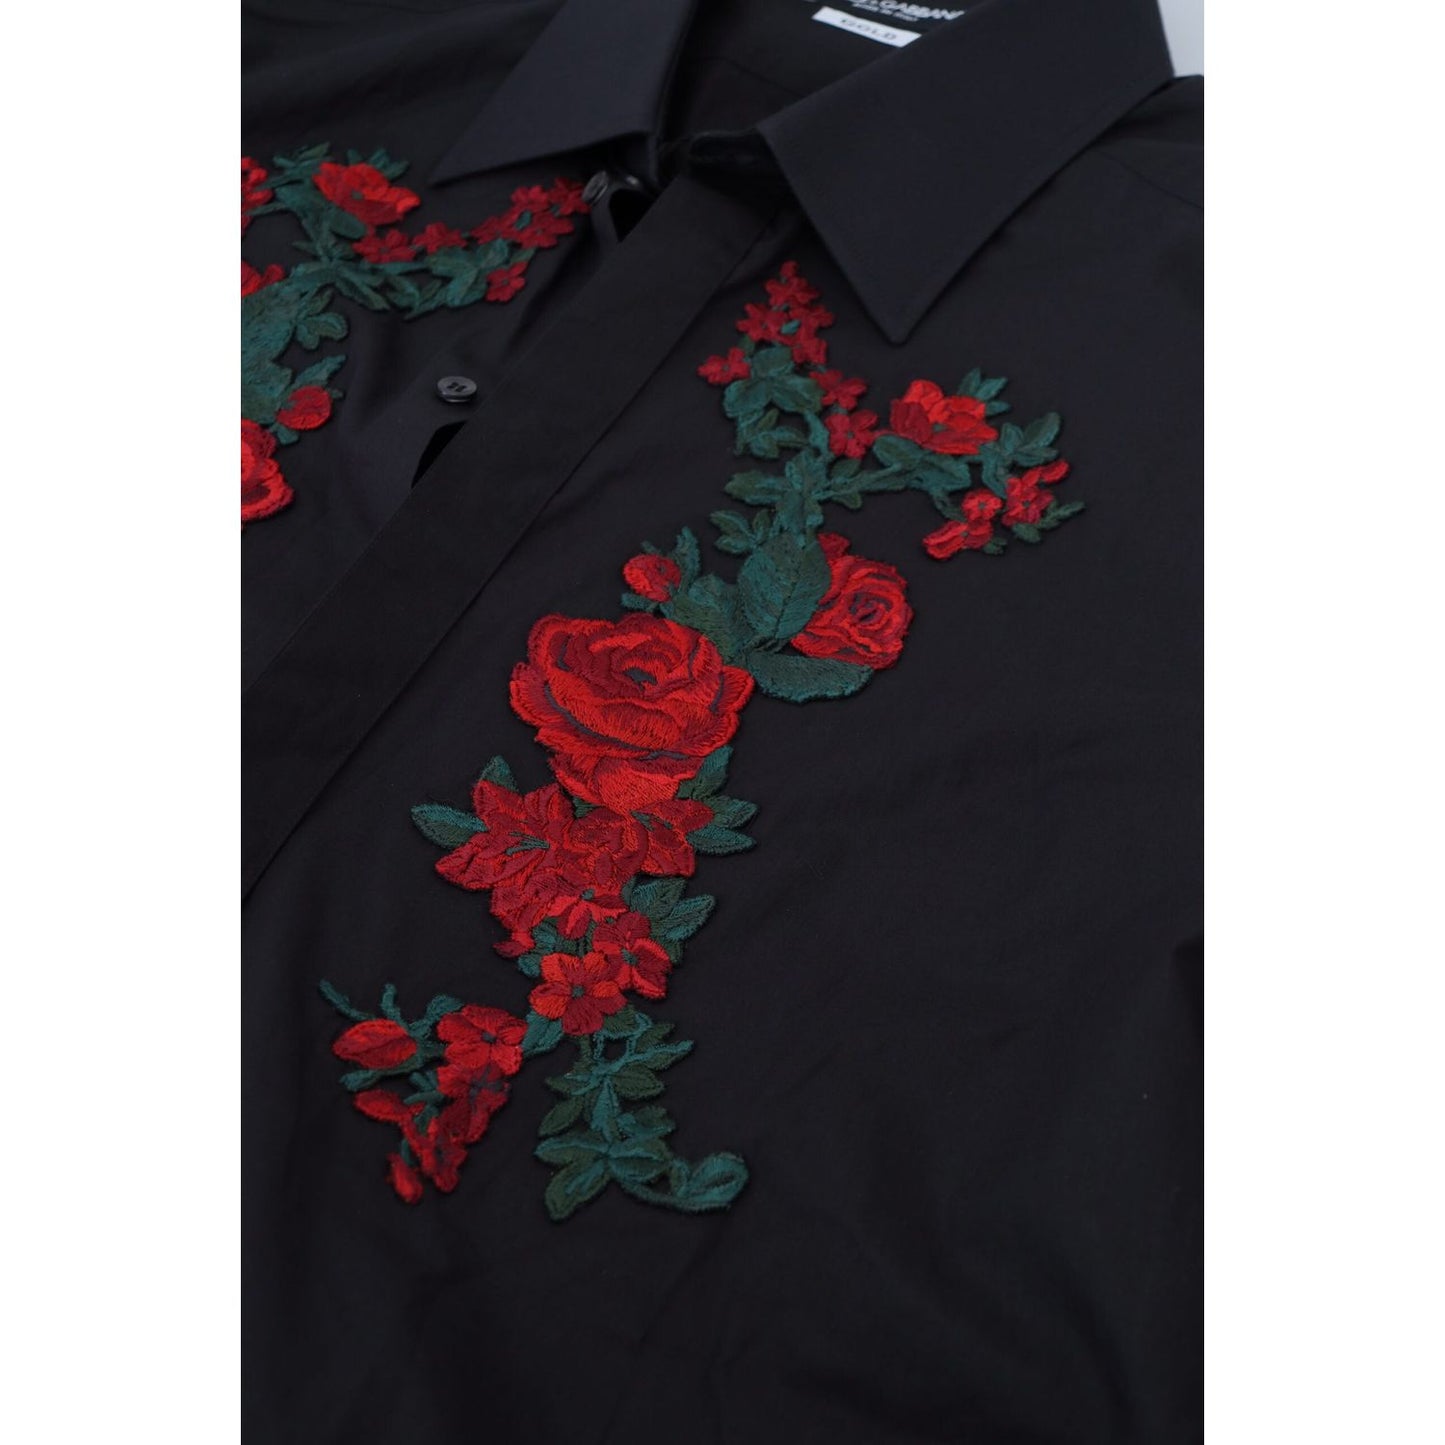 Dolce & Gabbana Elegant Floral Embroidered Cotton Shirt black-floral-embroidery-men-long-sleeves-gold-shirt IMG_6994-scaled-f65c0cdf-594.jpg